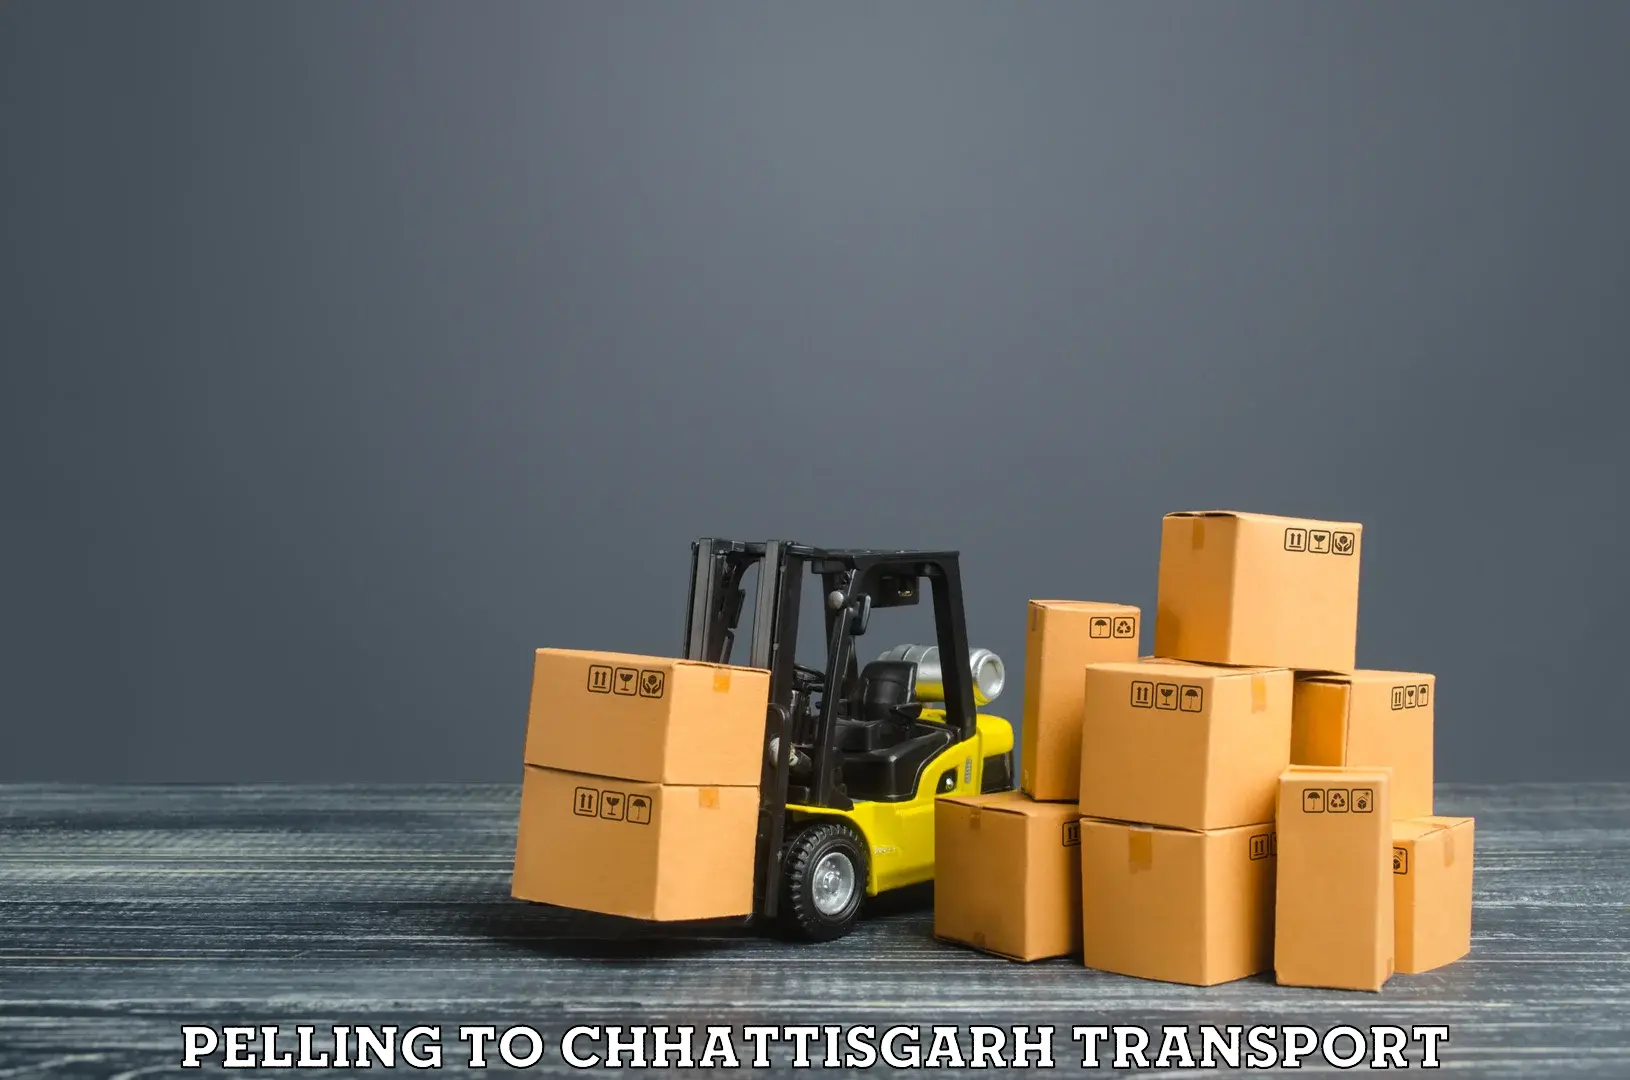 Transport shared services Pelling to Chirimiri